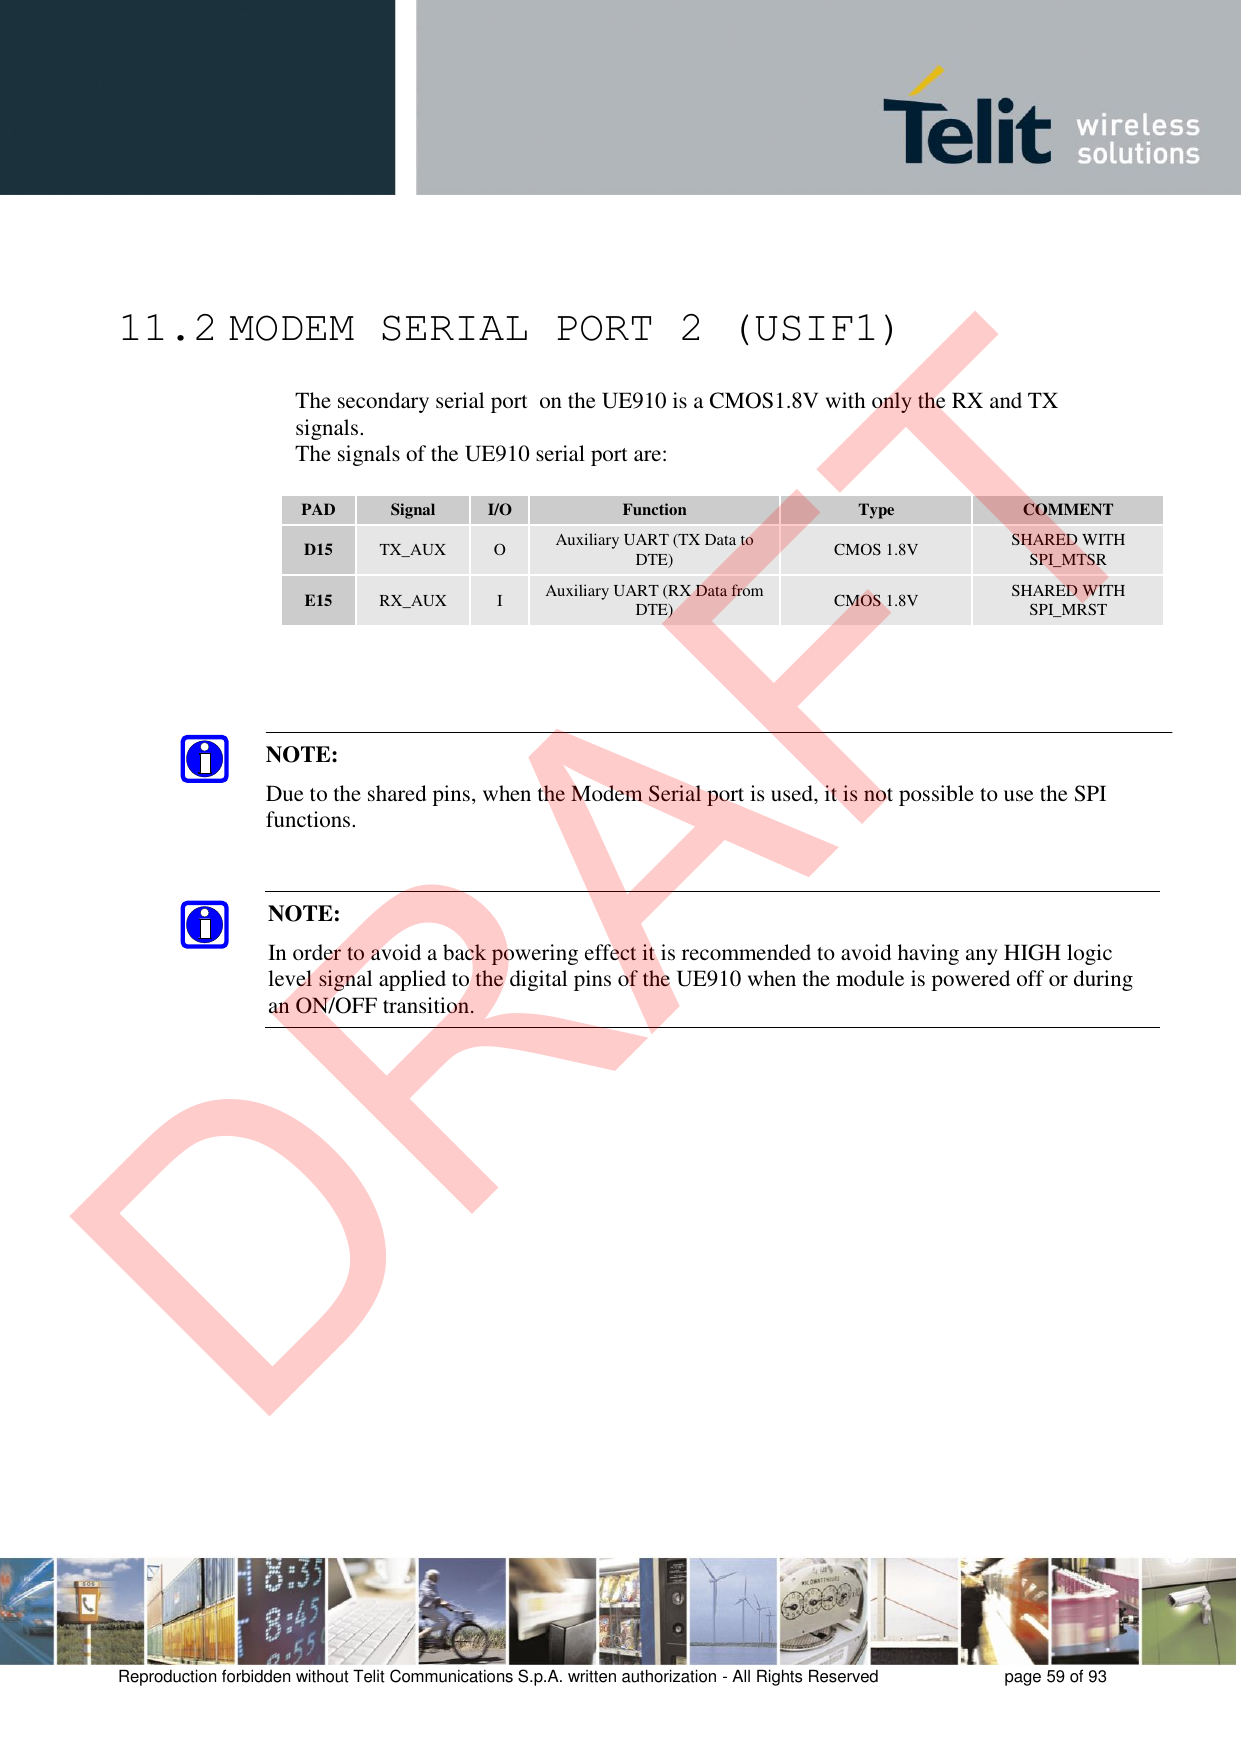 Reproduction forbidden without Telit Communications S.p.A. written authorization - All Rights Reserved  page 59 of 93 11.2 MODEM SERIAL PORT 2 (USIF1) The secondary serial port  on the UE910 is a CMOS1.8V with only the RX and TX signals.  The signals of the UE910 serial port are: PAD Signal I/O Function Type COMMENT D15 TX_AUX O Auxiliary UART (TX Data to DTE) CMOS 1.8V SHARED WITH SPI_MTSR E15 RX_AUX I Auxiliary UART (RX Data from DTE) CMOS 1.8V SHARED WITH SPI_MRST NOTE: In order to avoid a back powering effect it is recommended to avoid having any HIGH logic level signal applied to the digital pins of the UE910 when the module is powered off or during an ON/OFF transition. NOTE: Due to the shared pins, when the Modem Serial port is used, it is not possible to use the SPI functions. DRAFT